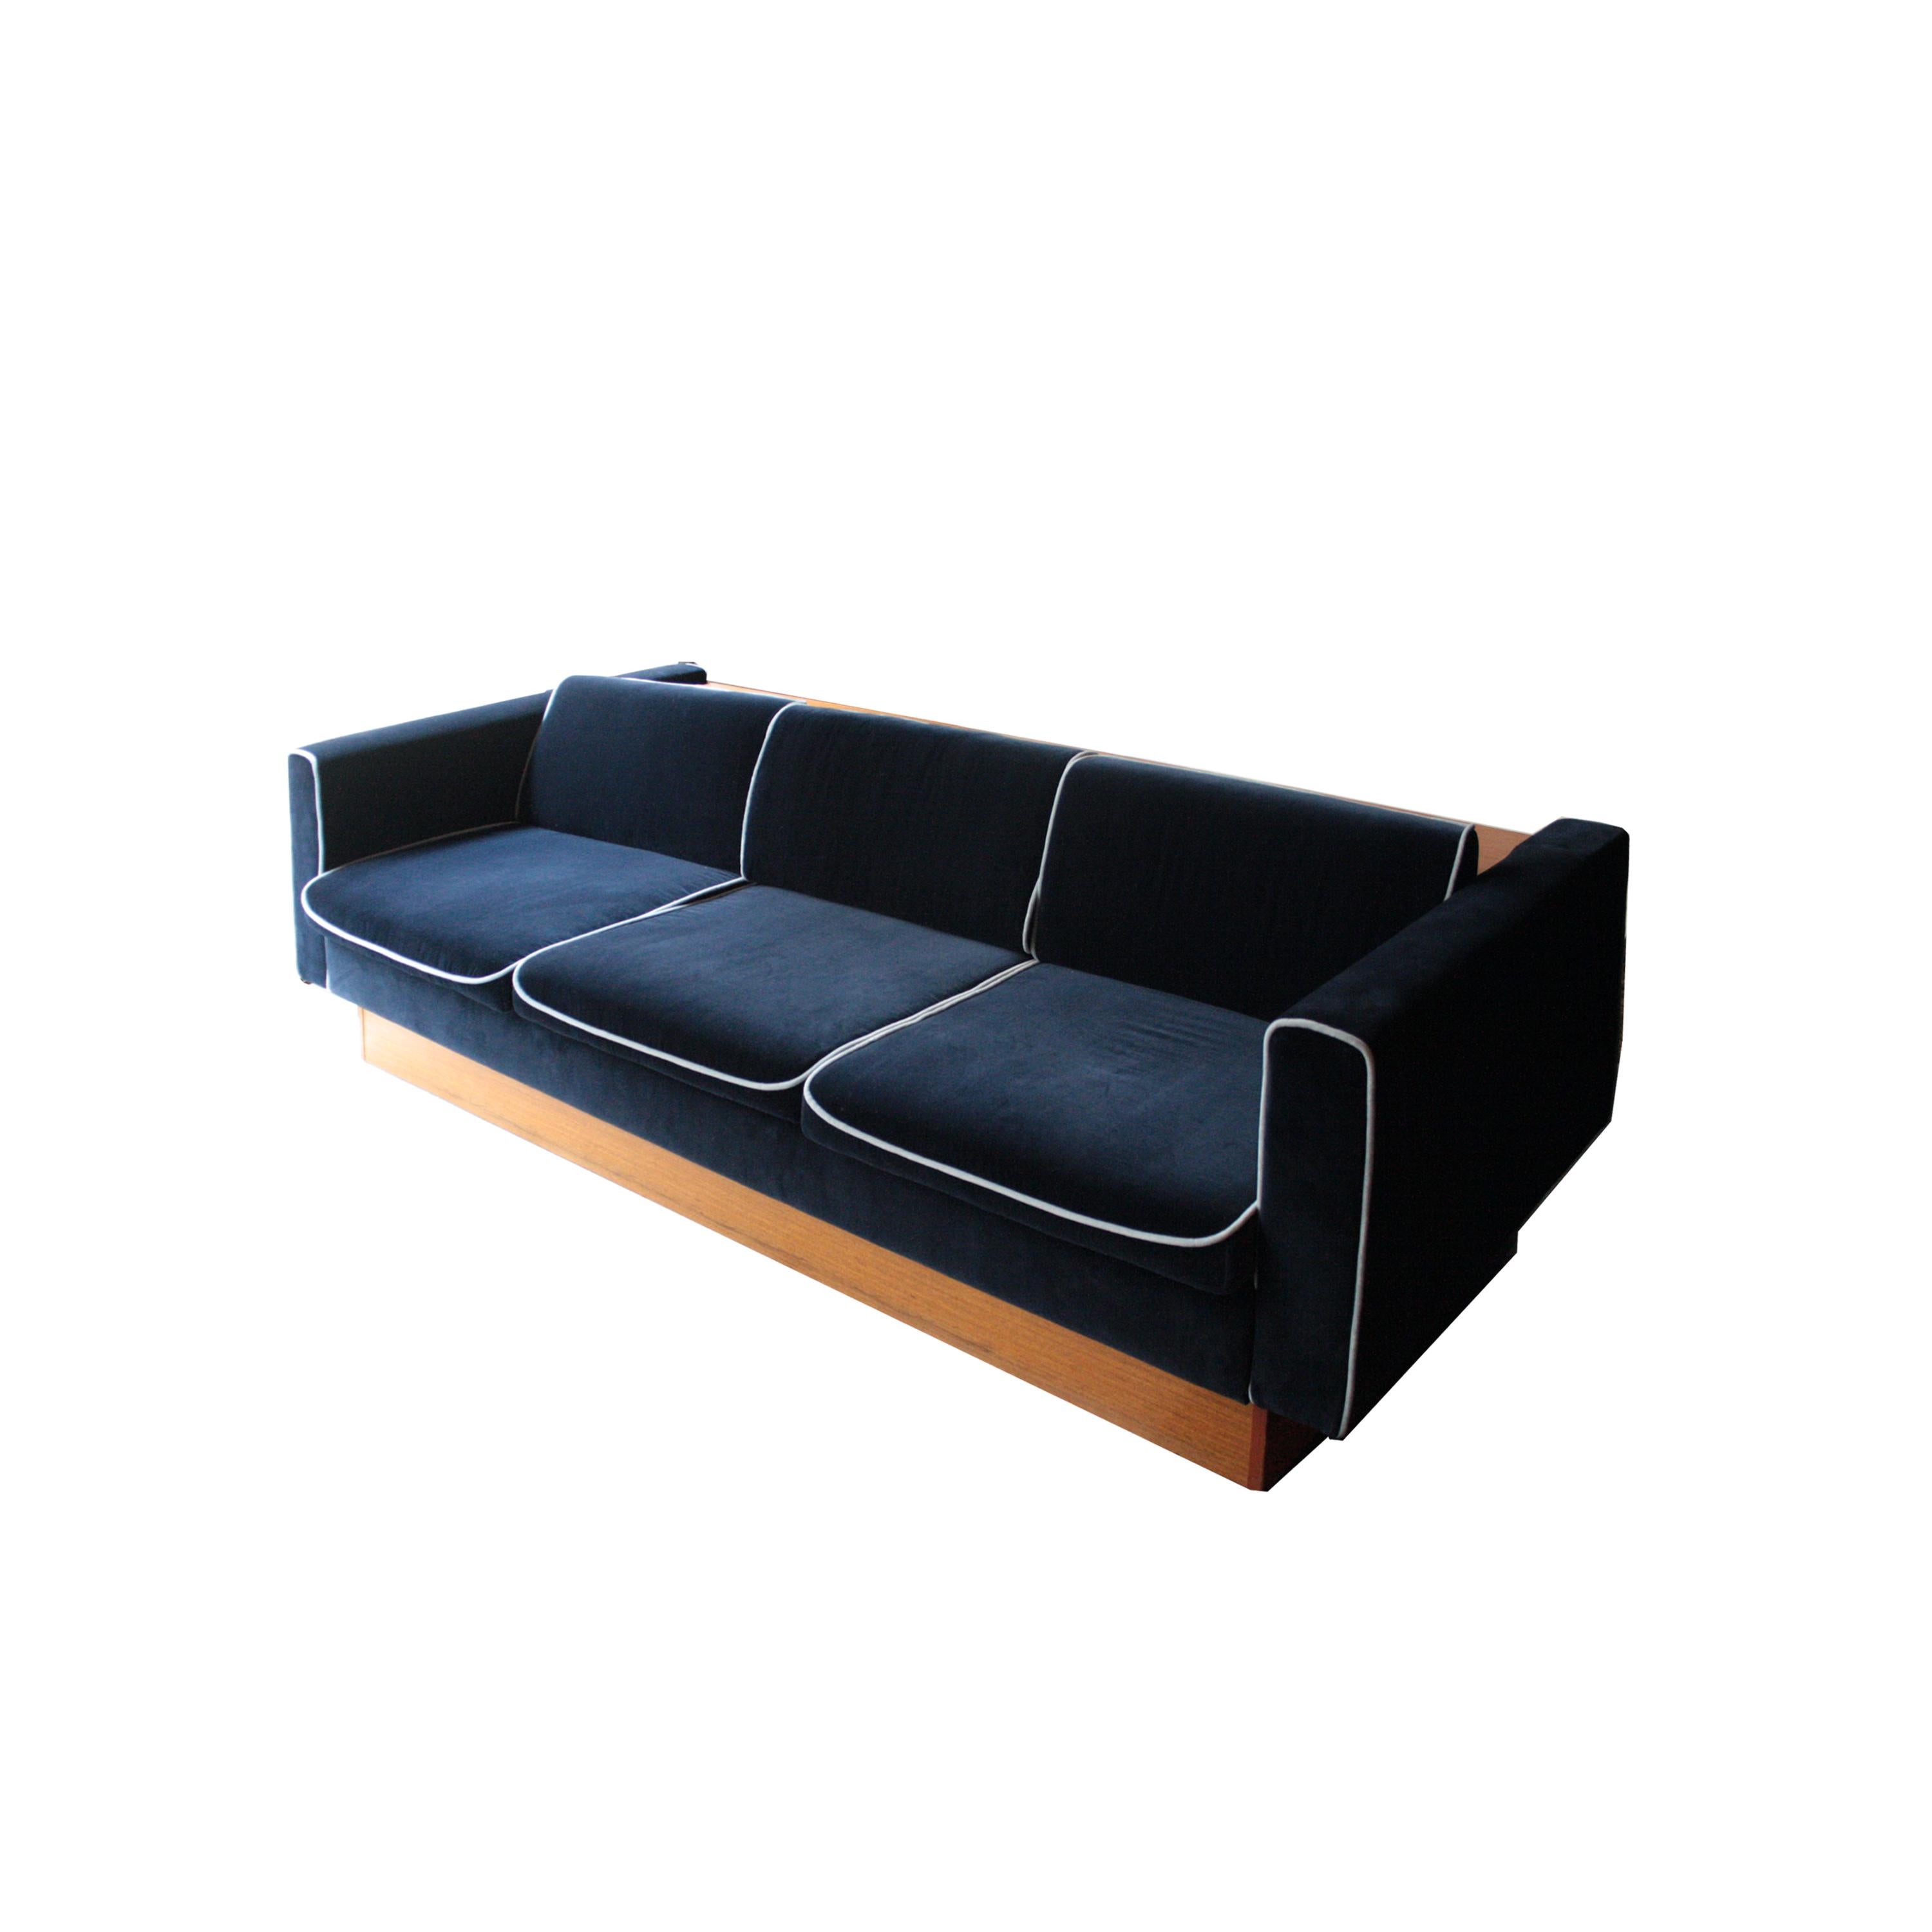 Sofa bed with solid oakwood structure, upholstered in cotton velvet.
 